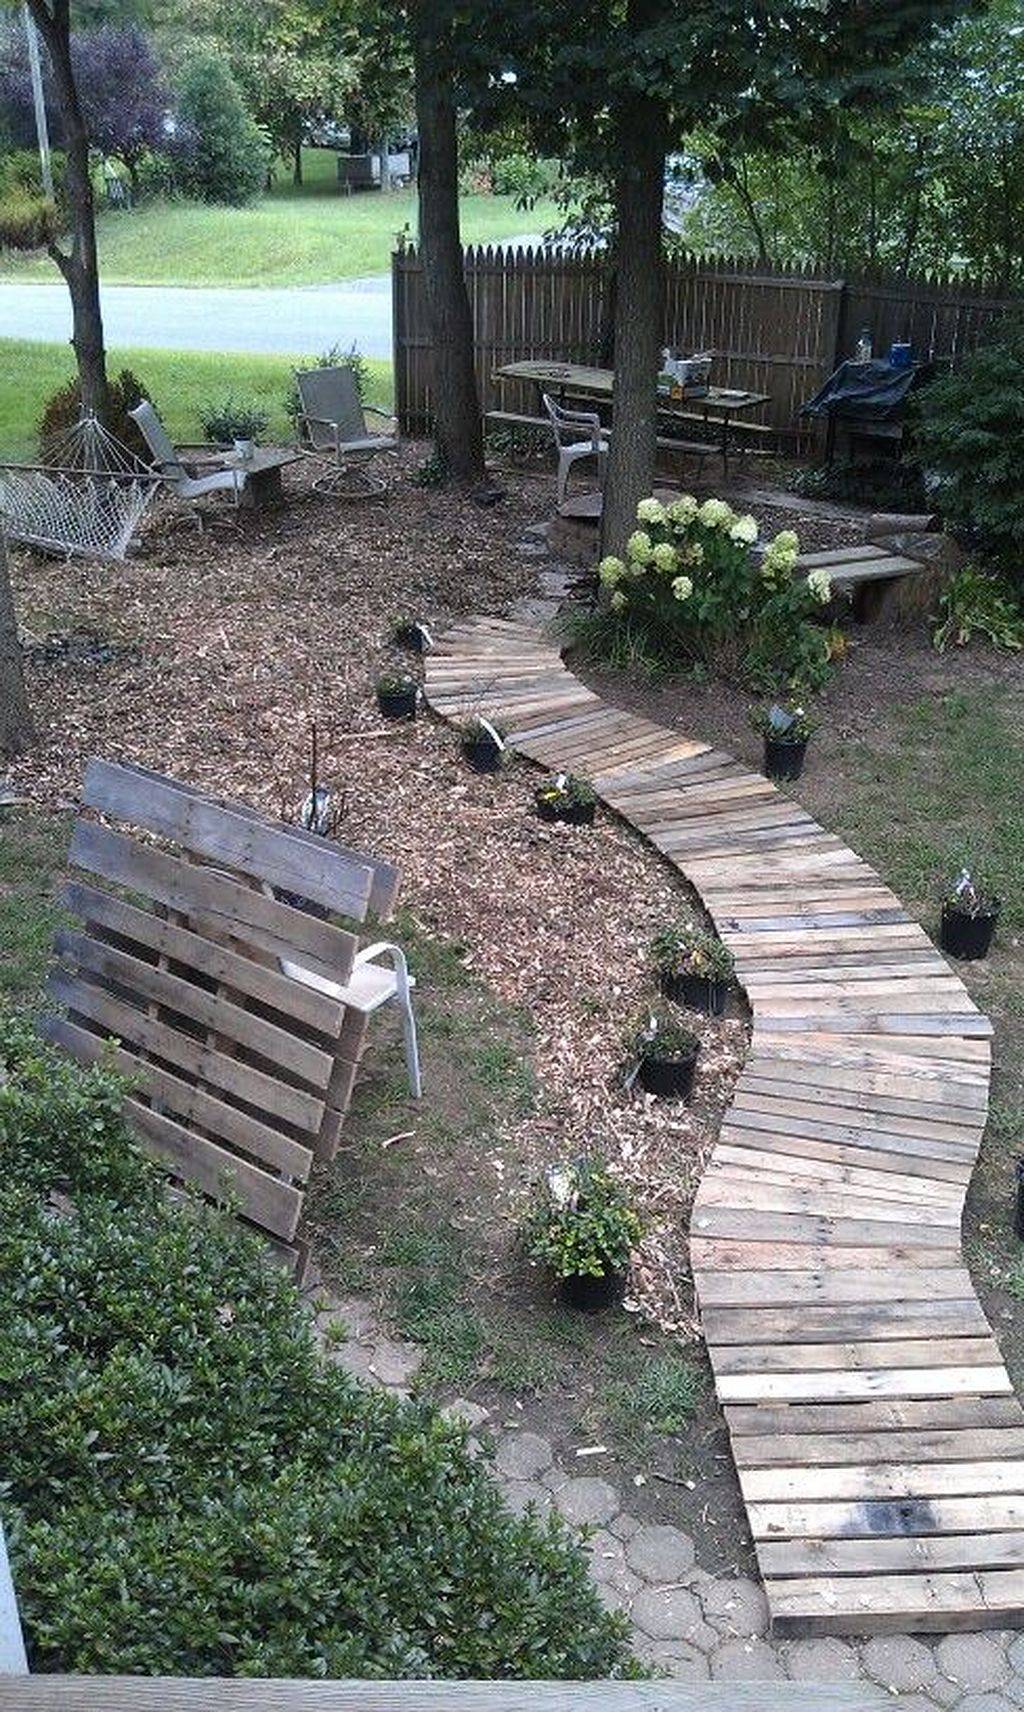 Catchy And Cozy Wooden Garden Paths Shelterness